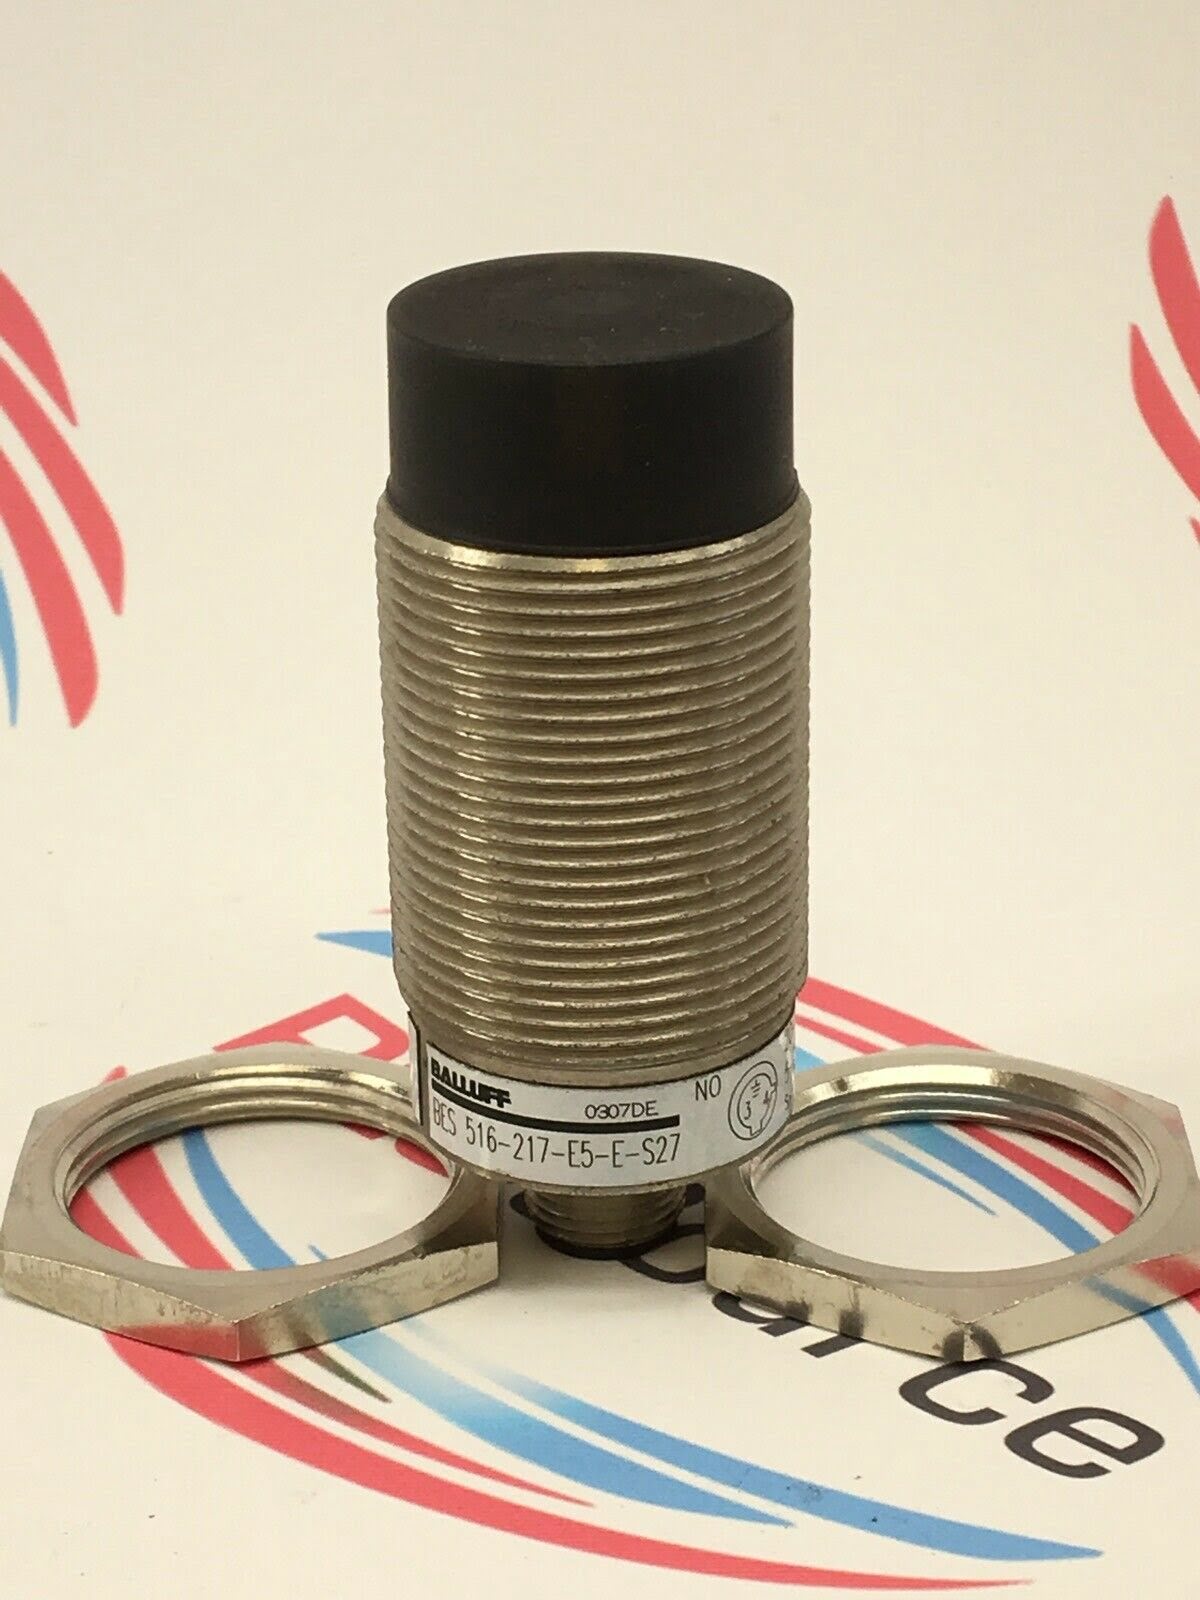 Details about   BALLUFF BES516-327-E5-Y-S4 INDUCTIVE SENSOR NEW IN FACTORY BAG * 